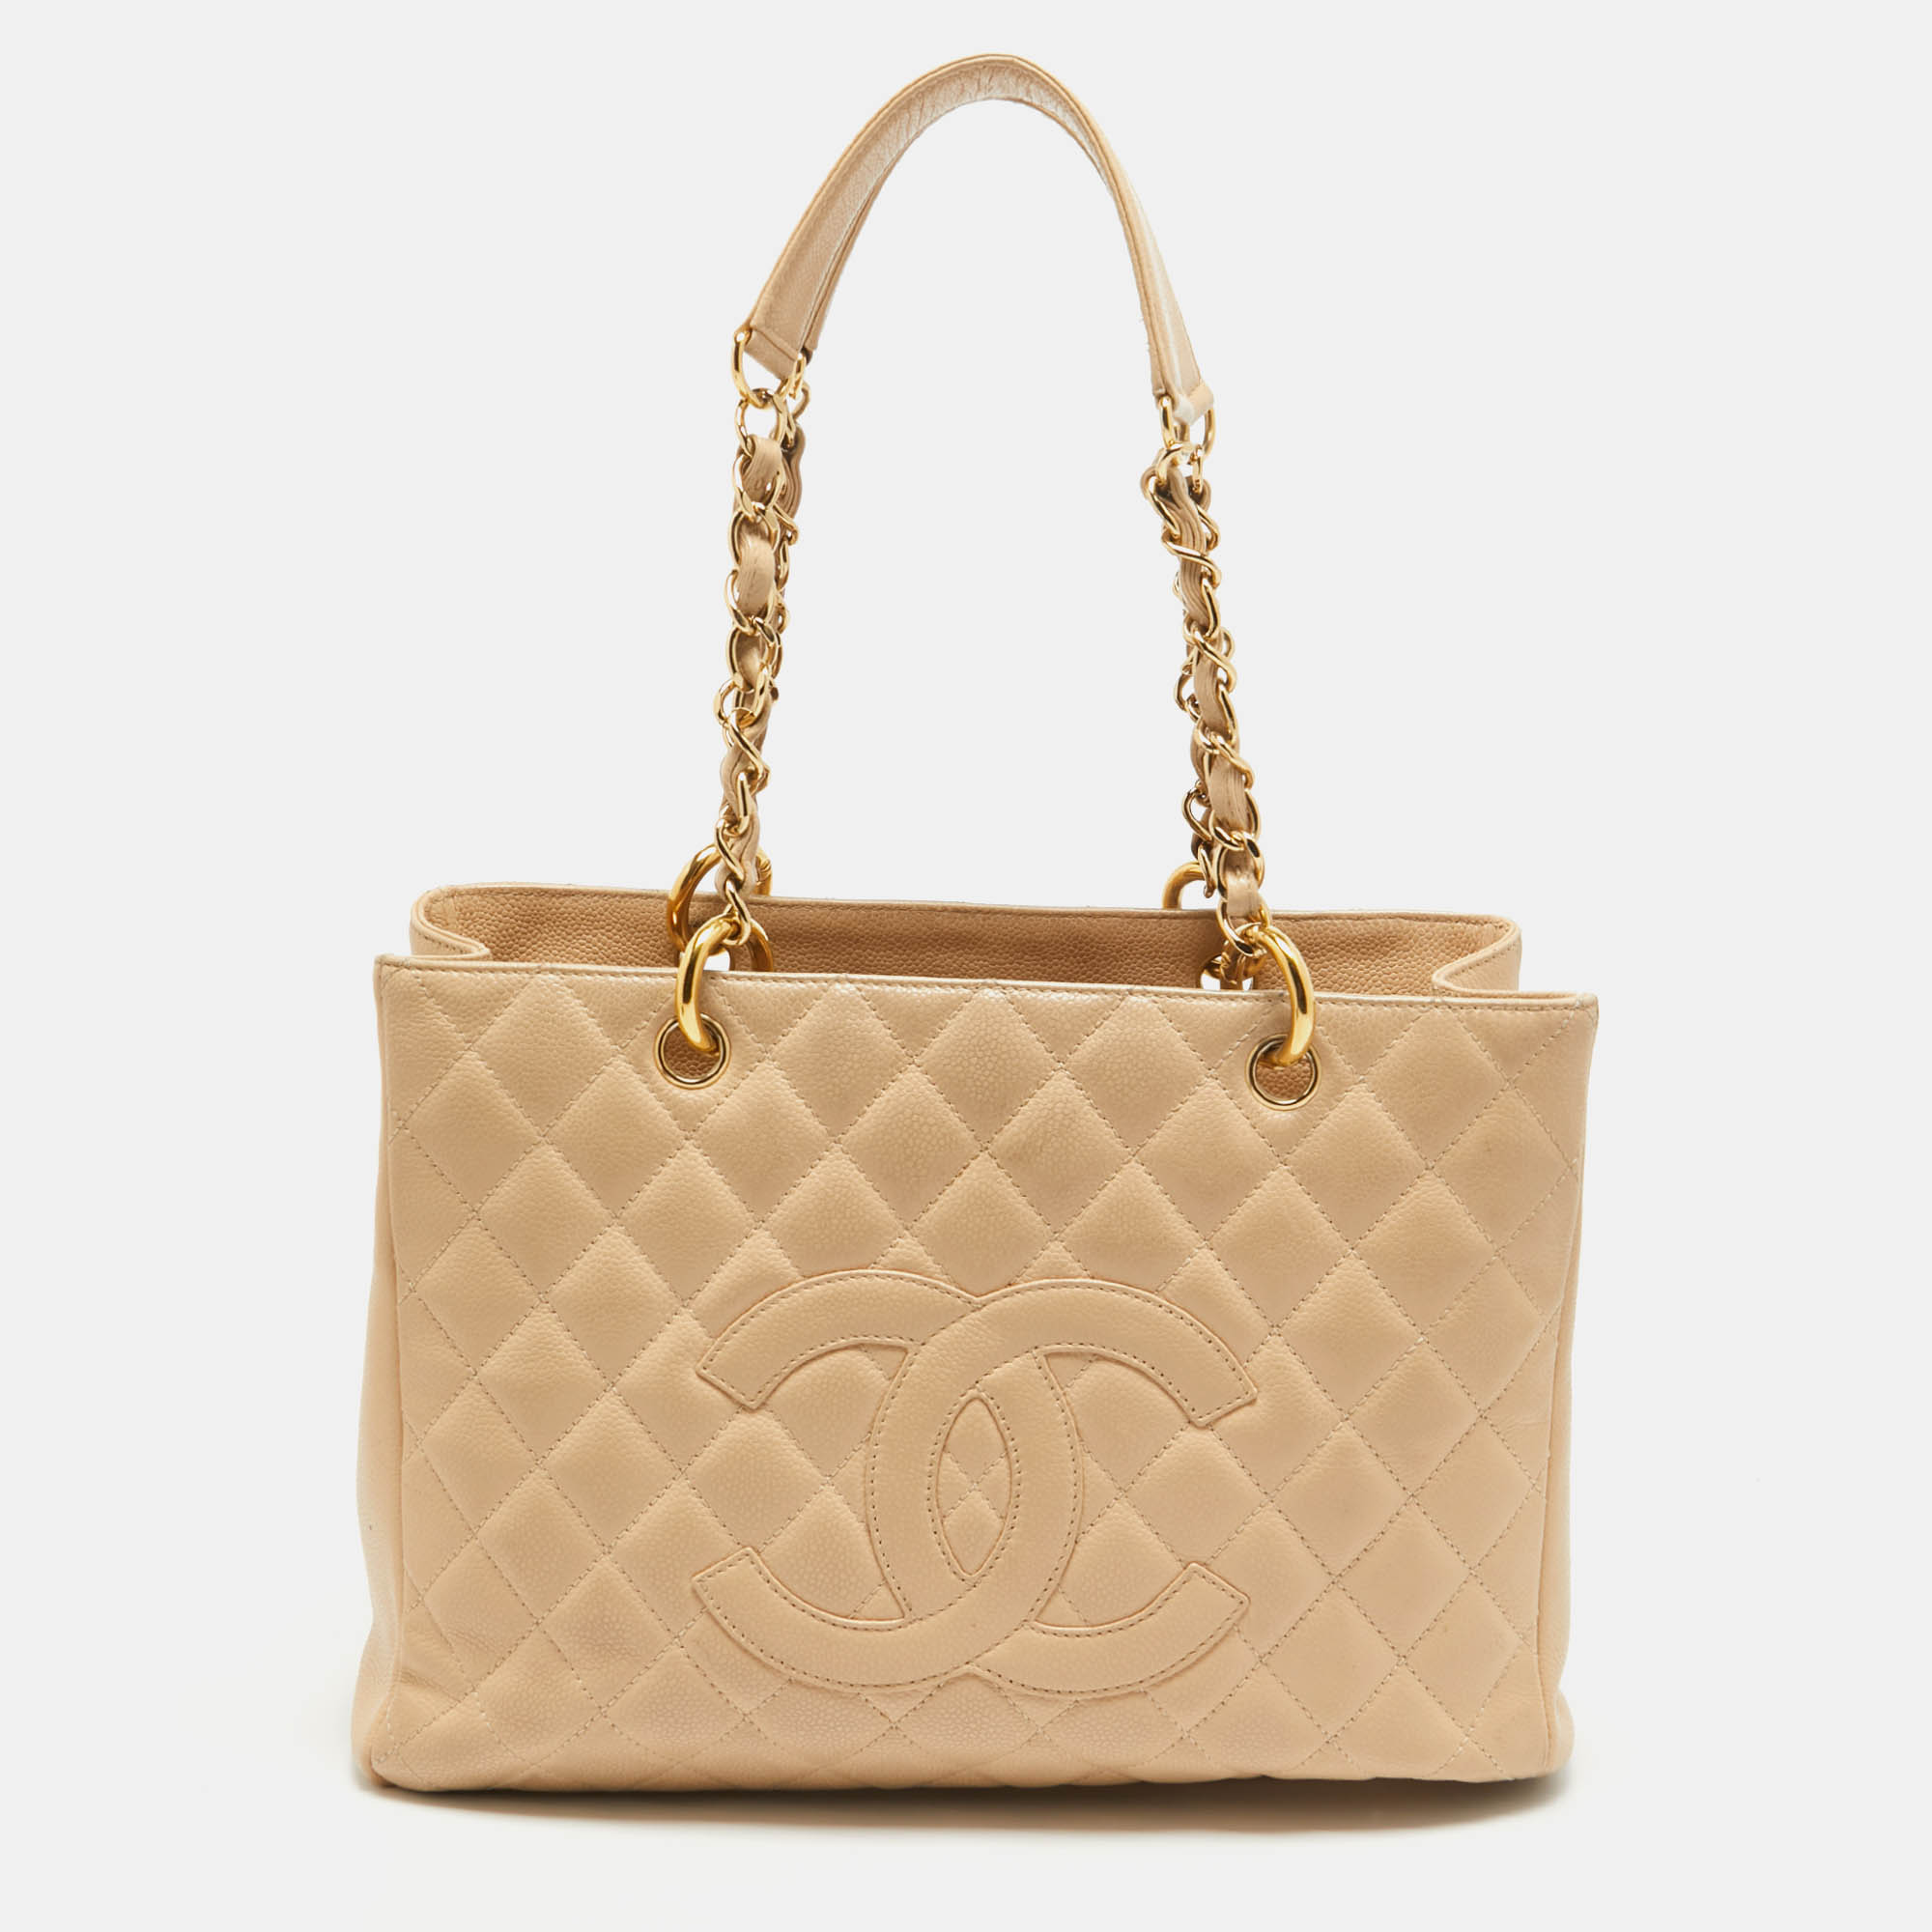 

Chanel Beige Quilted Caviar Leather GST Shopper Tote